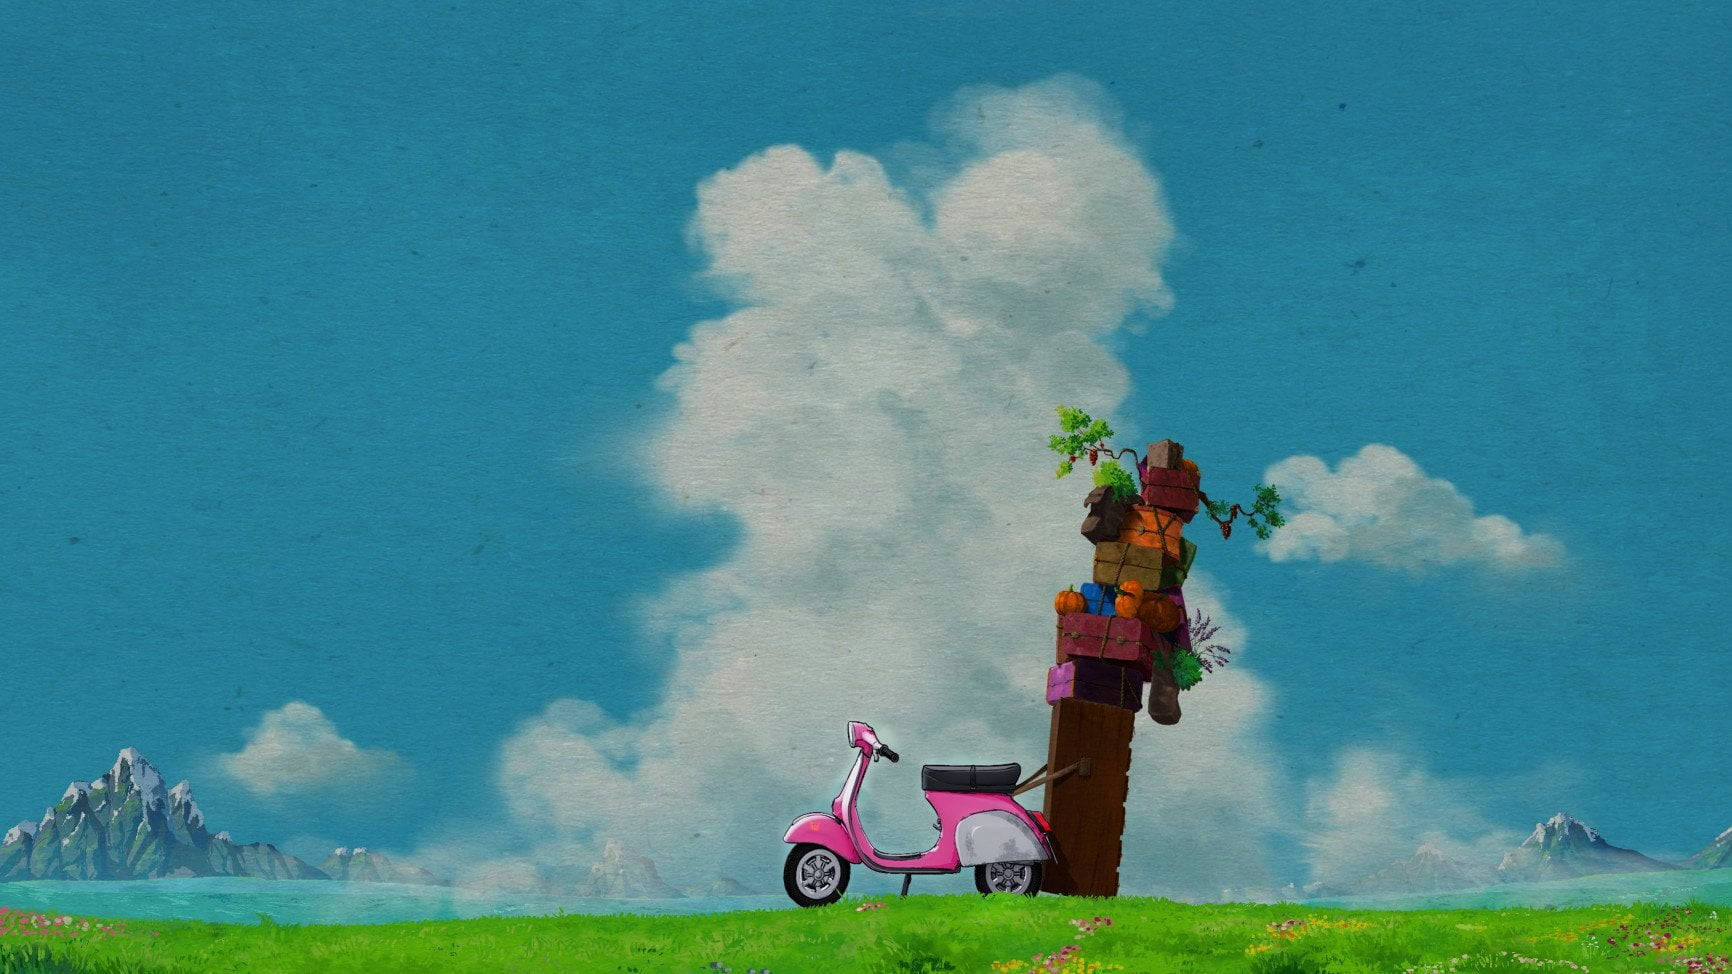 Studio Ghibli Scenery With Pink Scooter Wallpaper